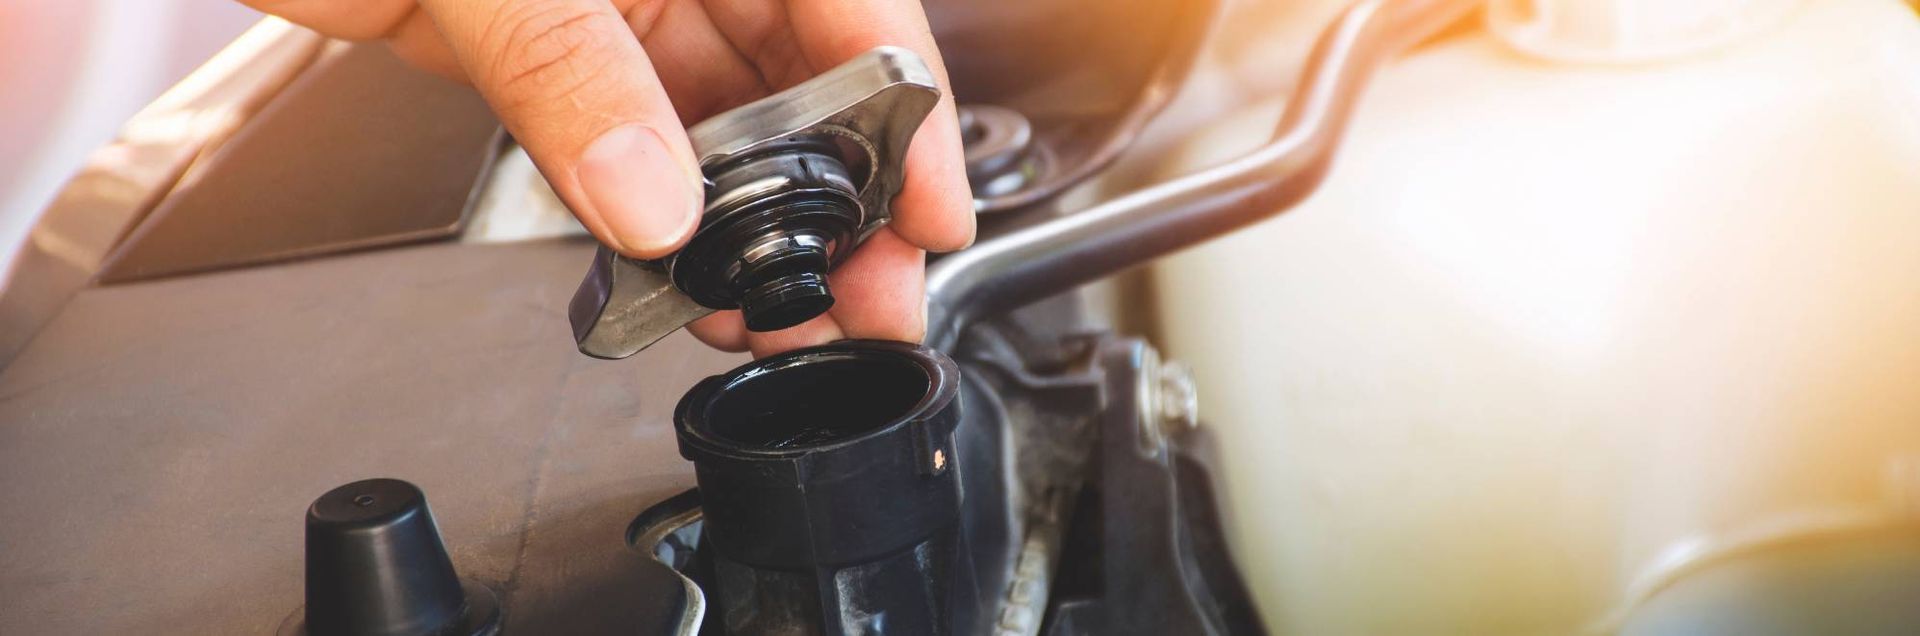 How to Add Coolant to Your Car: A Step-by-Step Guide